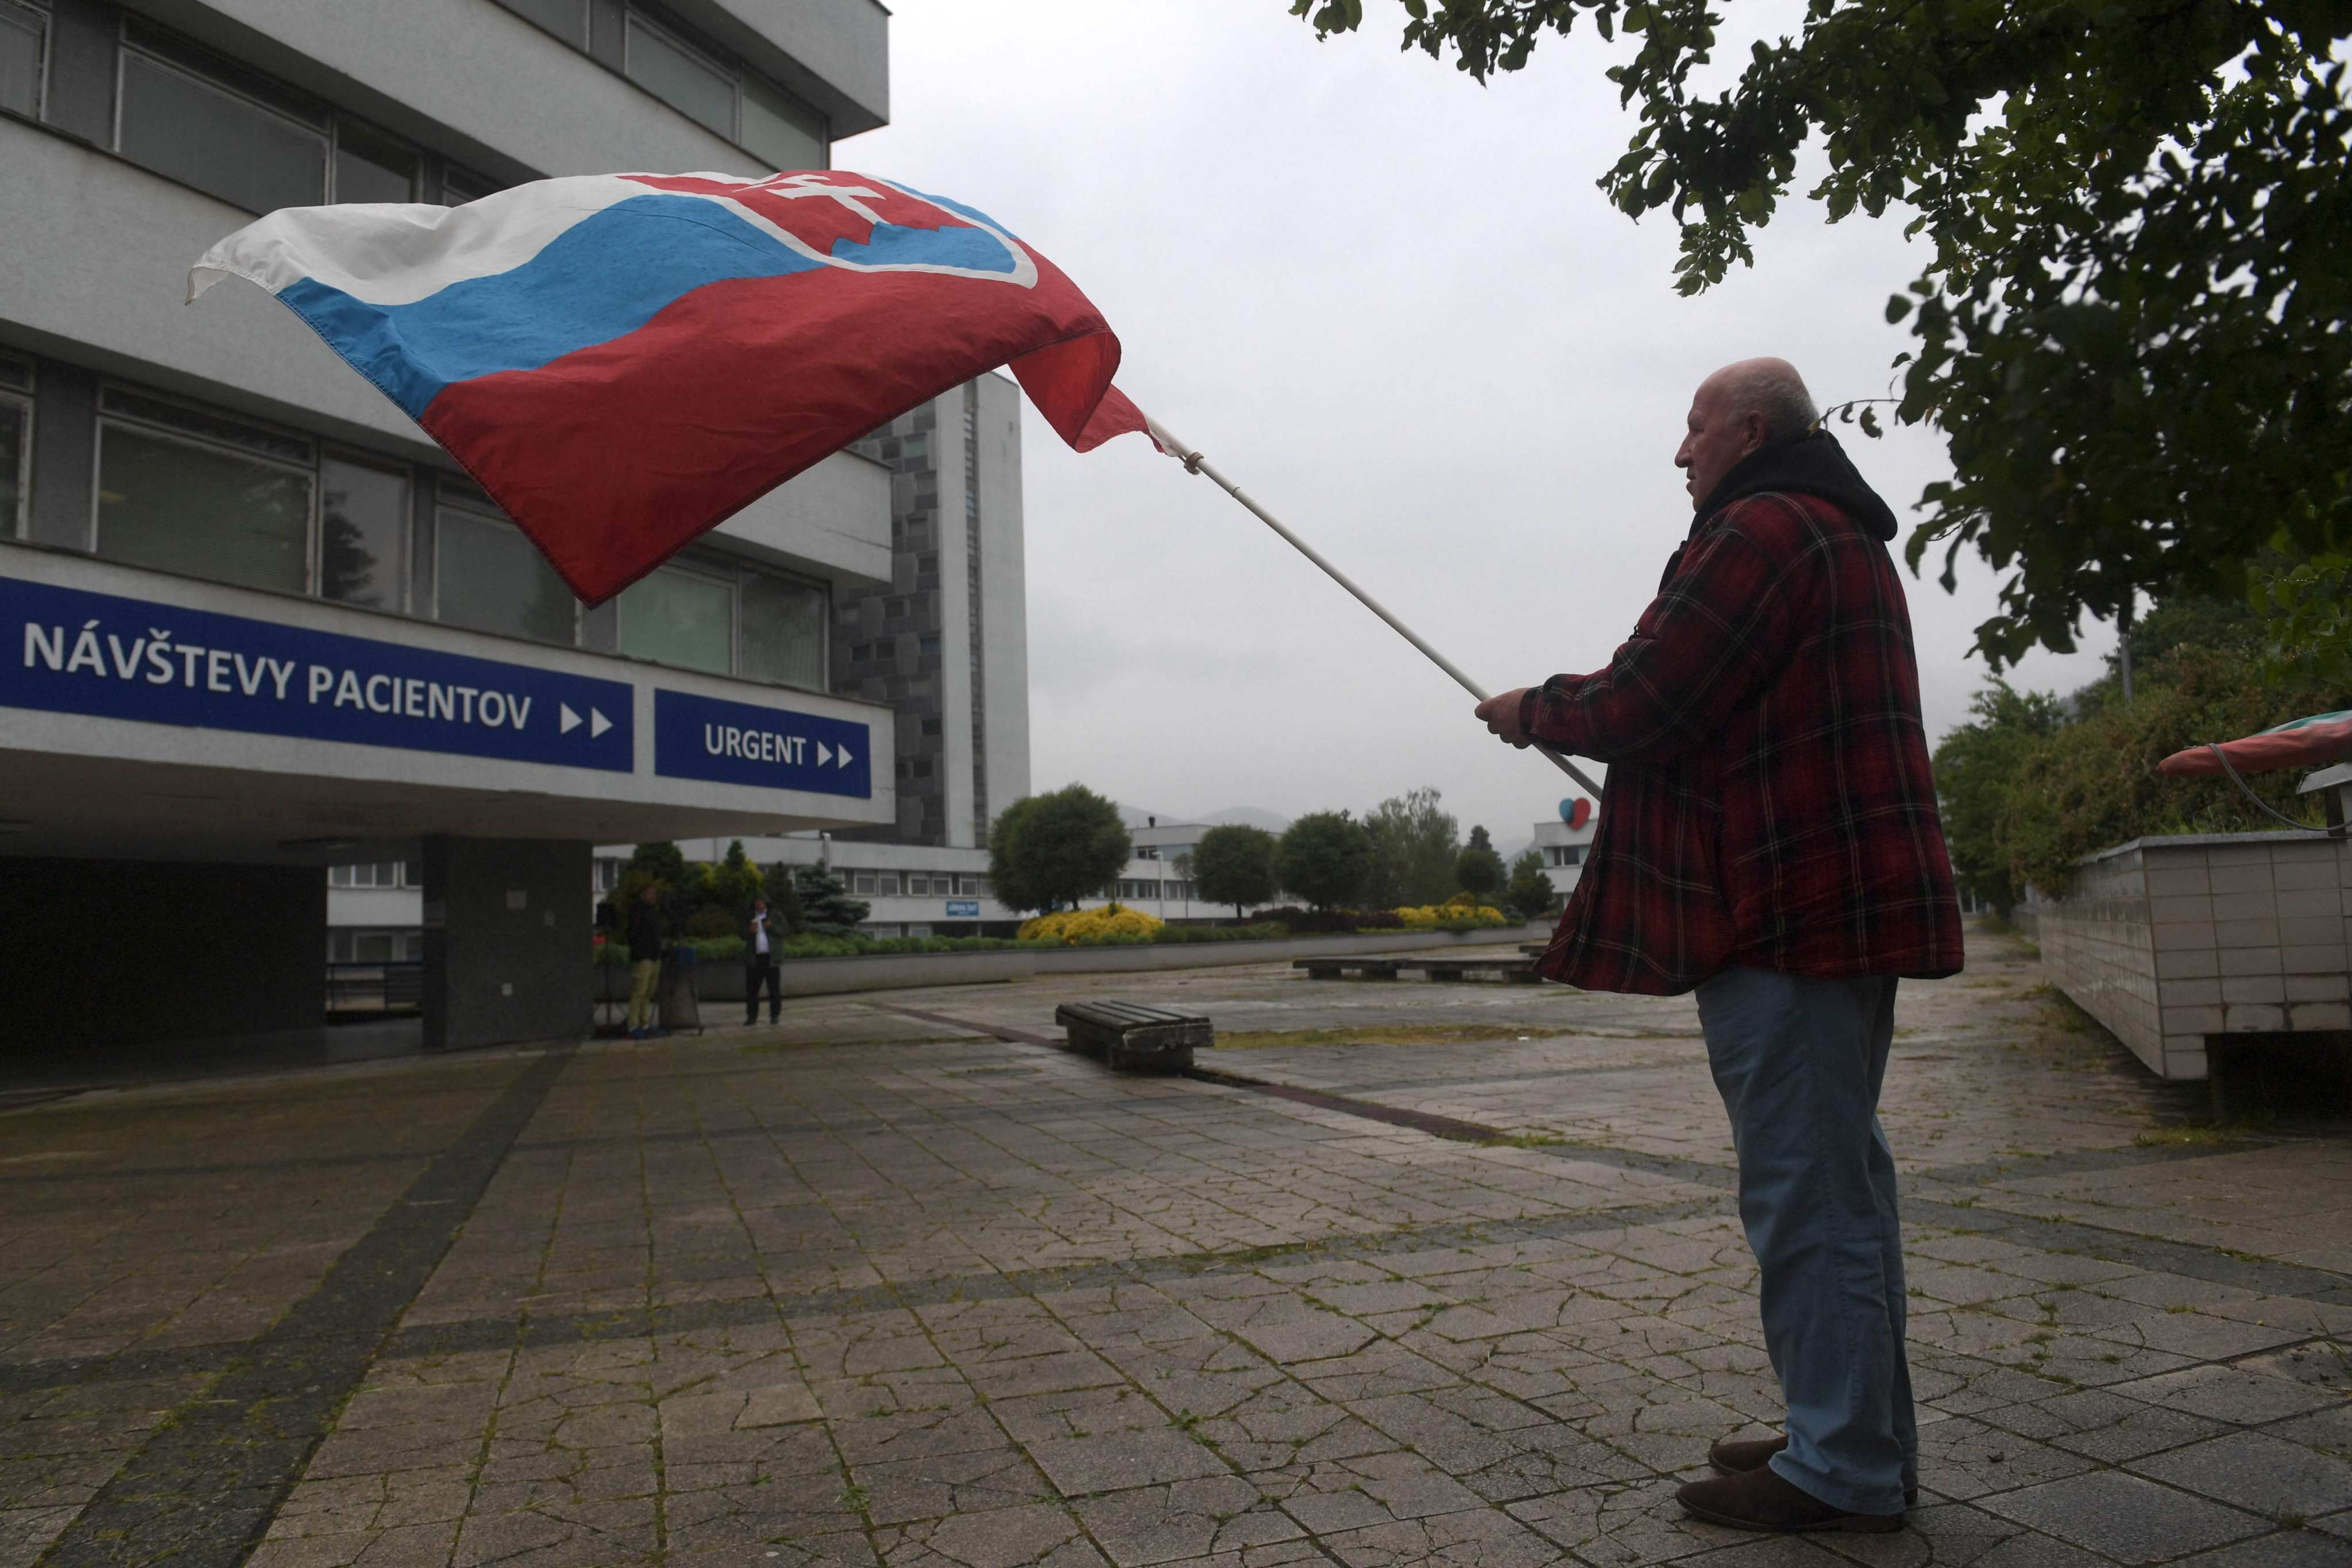 A supporter of the Slovakian government holds a Slovakian flag as he stands in front of the hospital in Banska Bystrica where Prime Minister Robert Fico is being treated. Photo: AFP